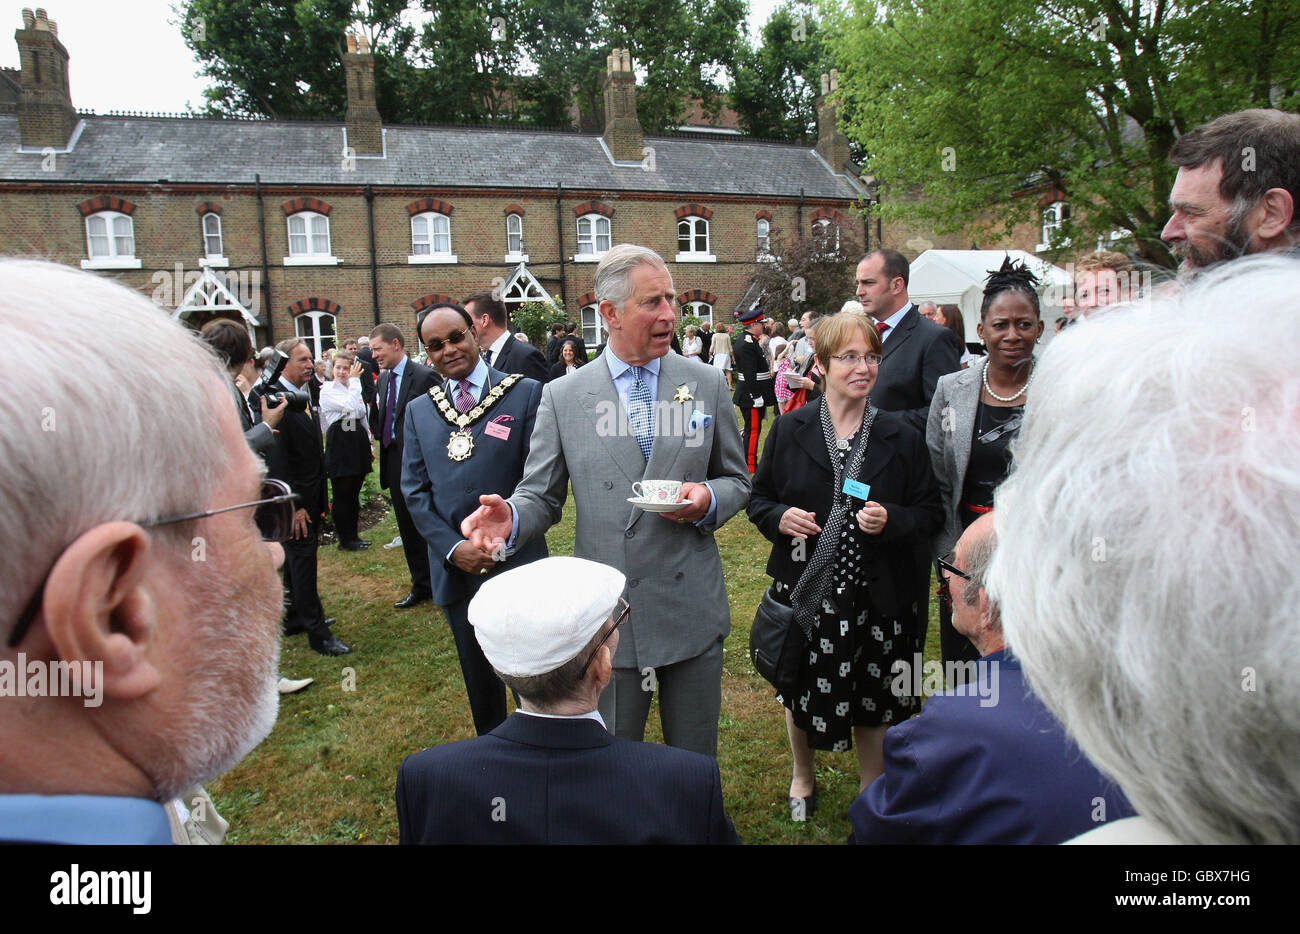 The Prince of Wales, patron of the Almshouse Association, during a visit to St Pancras almshouses in north London to celebrate the 150th anniversary of the Almshouses. Stock Photo